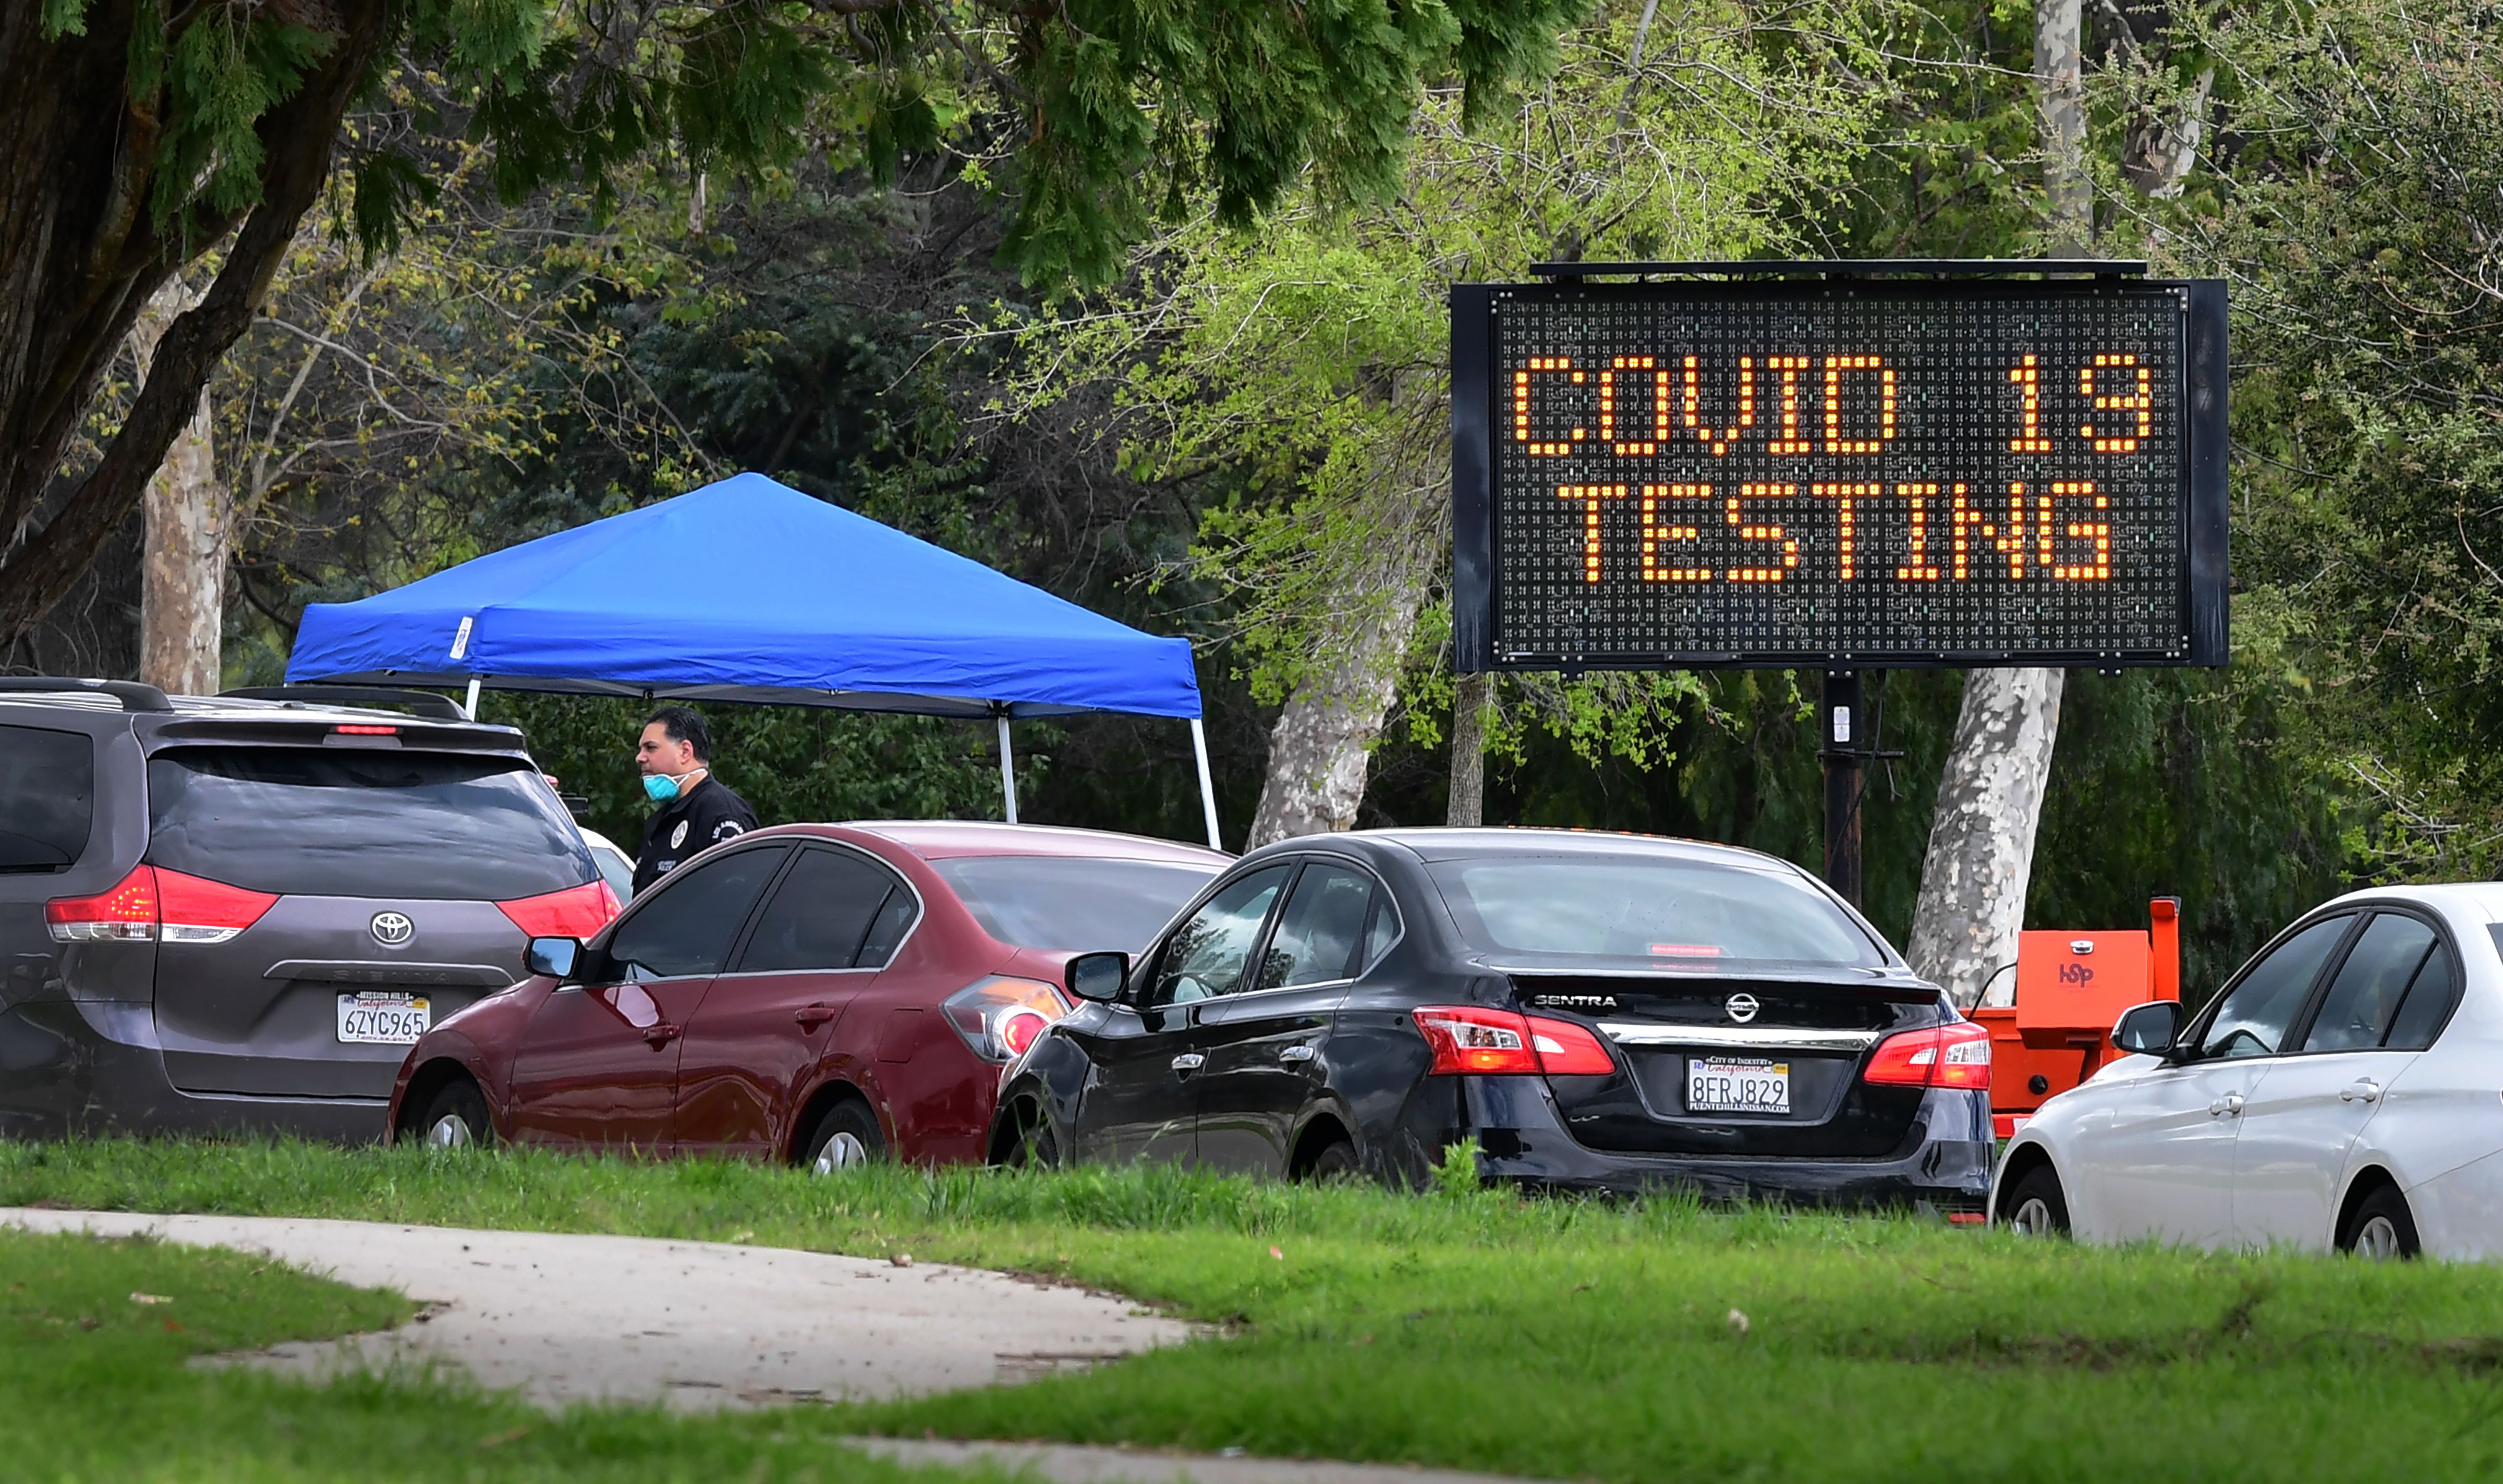 Cars wait to enter a COVID-19 testing center in Pacoima, Calif., on March 25, 2020. (Frederic J. Brown—AFP/Getty Images)